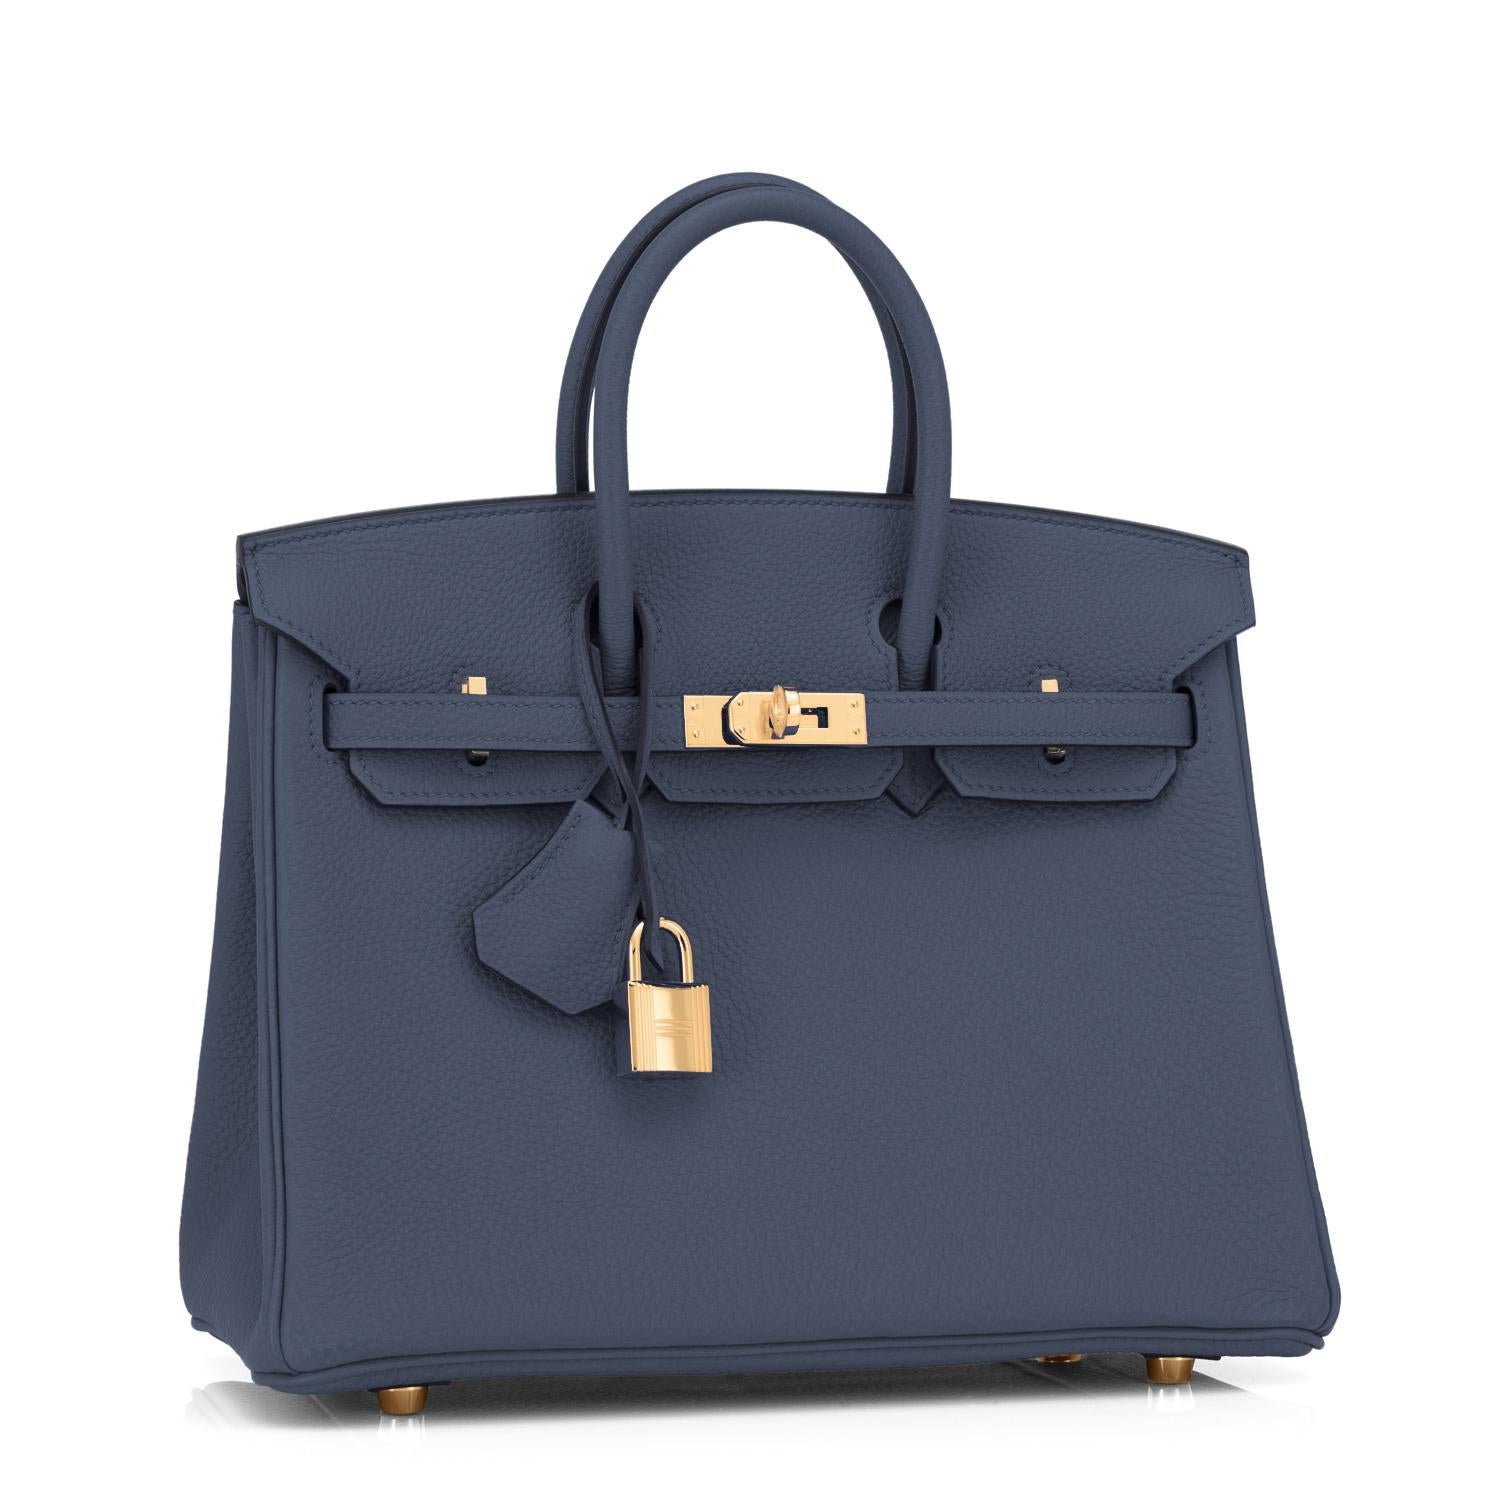 Hermes Navy Blue Nuit Togo 25cm Birkin Gold Hardware Jewel-Toned Y Stamp, 2020
Just purchased from Hermes store! Bag bears new interior 2020 Y Stamp.
Brand New in Box. Store fresh. Pristine Condition (with plastic on hardware)
Perfect gift!  Comes